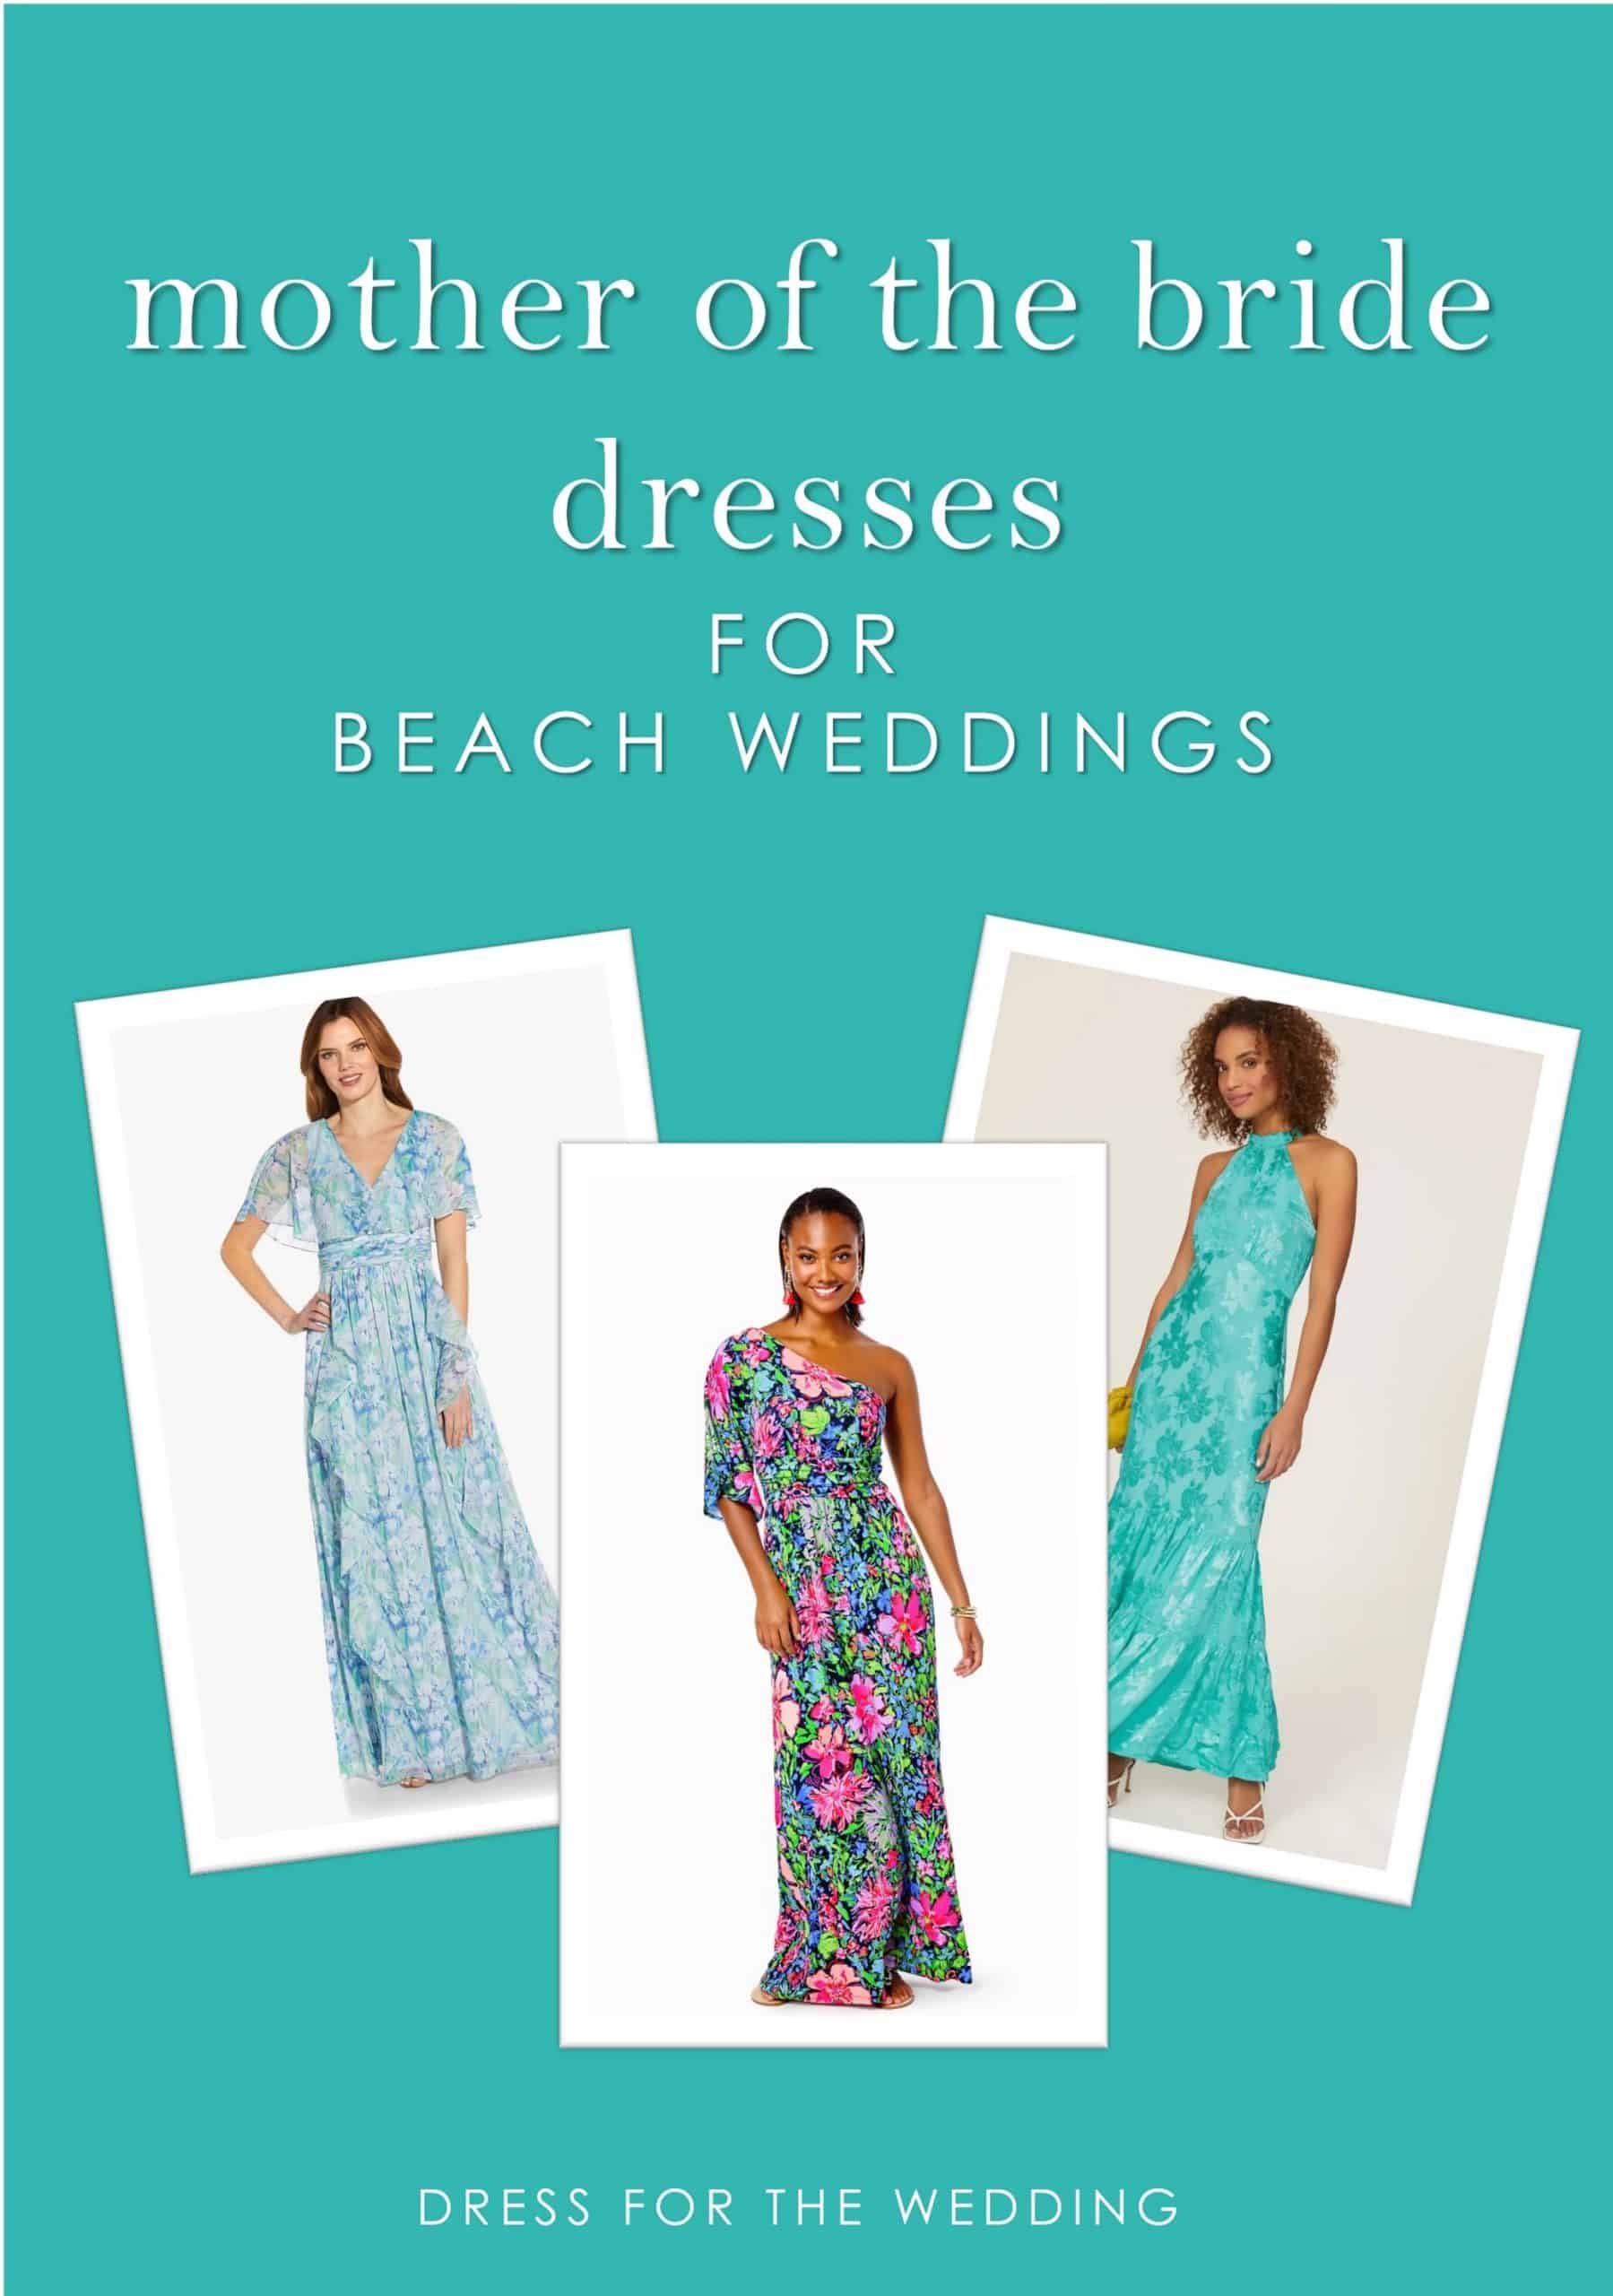 Mother of the Bride Dresses for a Beach Wedding - Dress for the Wedding